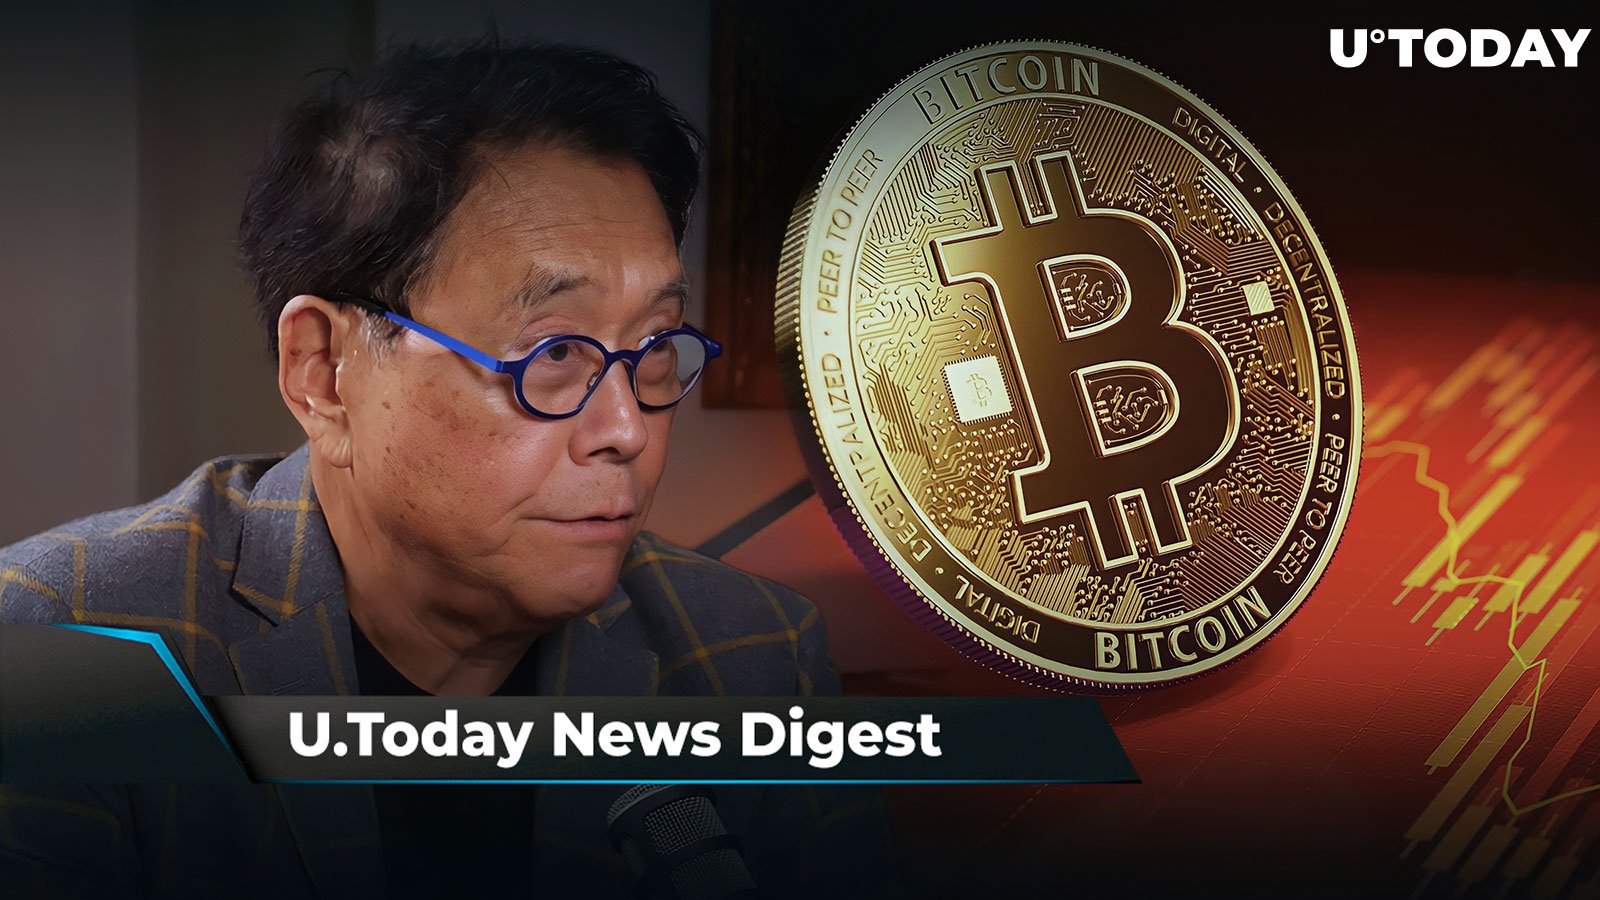 Here’s When XRP Will Take Off, BTC Plunges 5% in Minutes, "Rich Dad, Poor Dad" Author Urges Getting into Crypto Before Market Crash: Crypto News Digest by U.Today